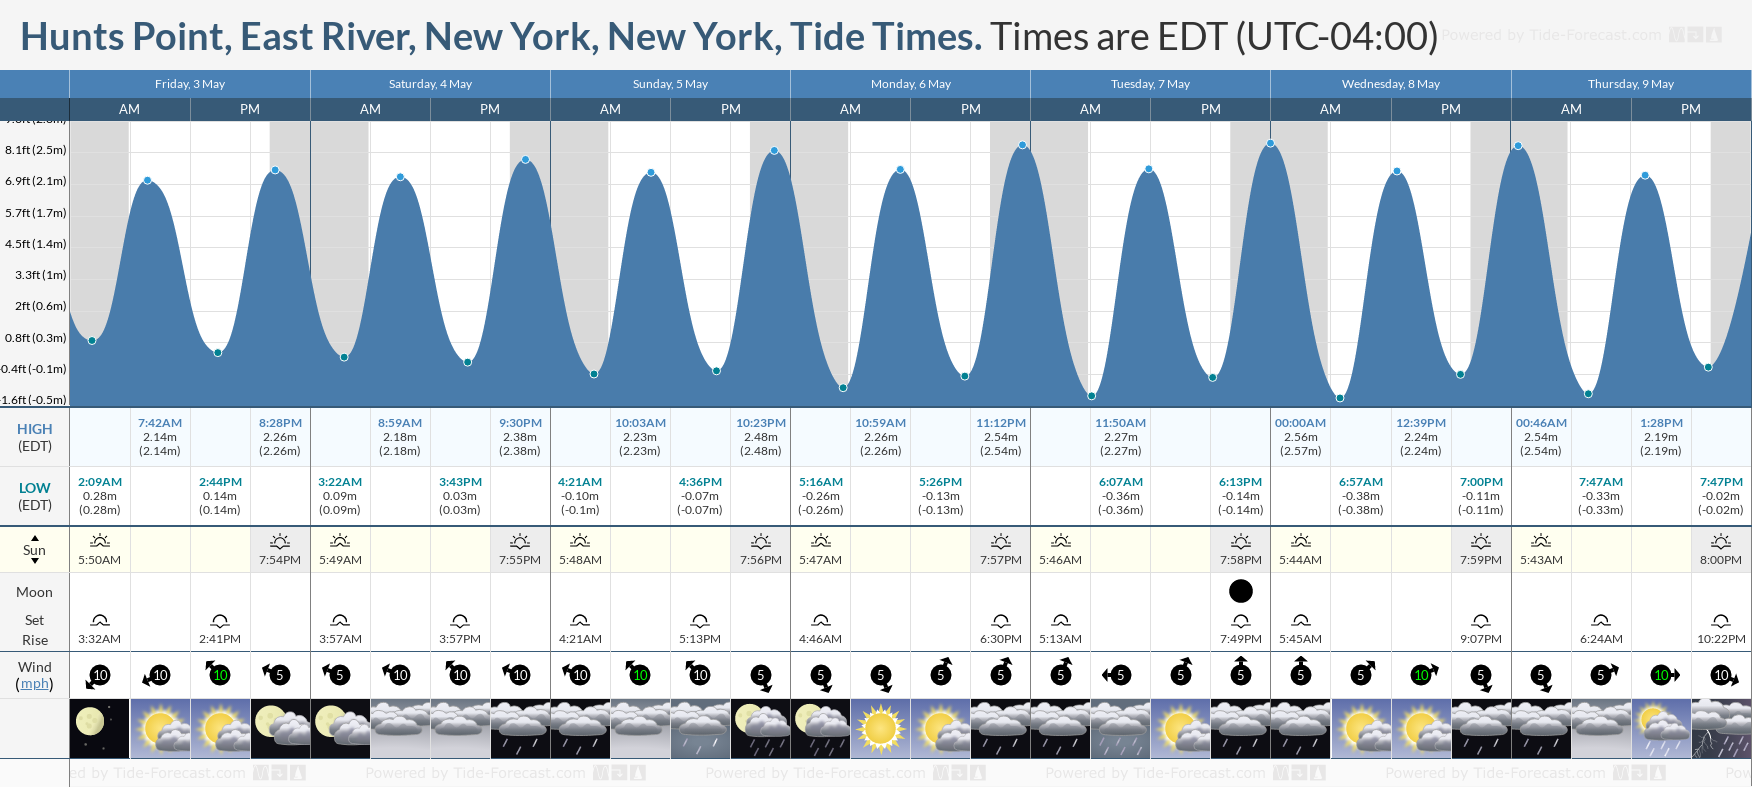 Hunts Point, East River, New York, New York Tide Chart including high and low tide tide times for the next 7 days